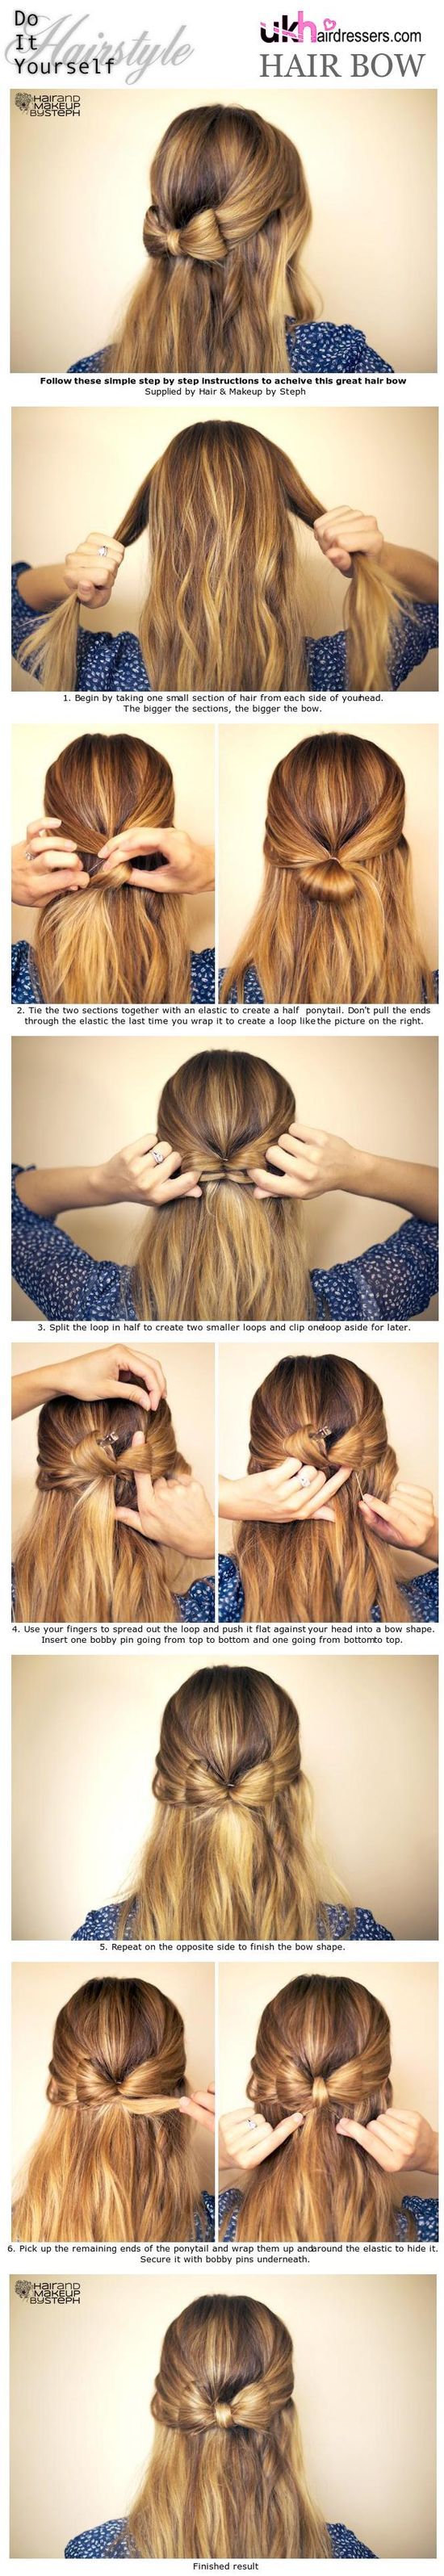 Nice bow hairstyle tutorial